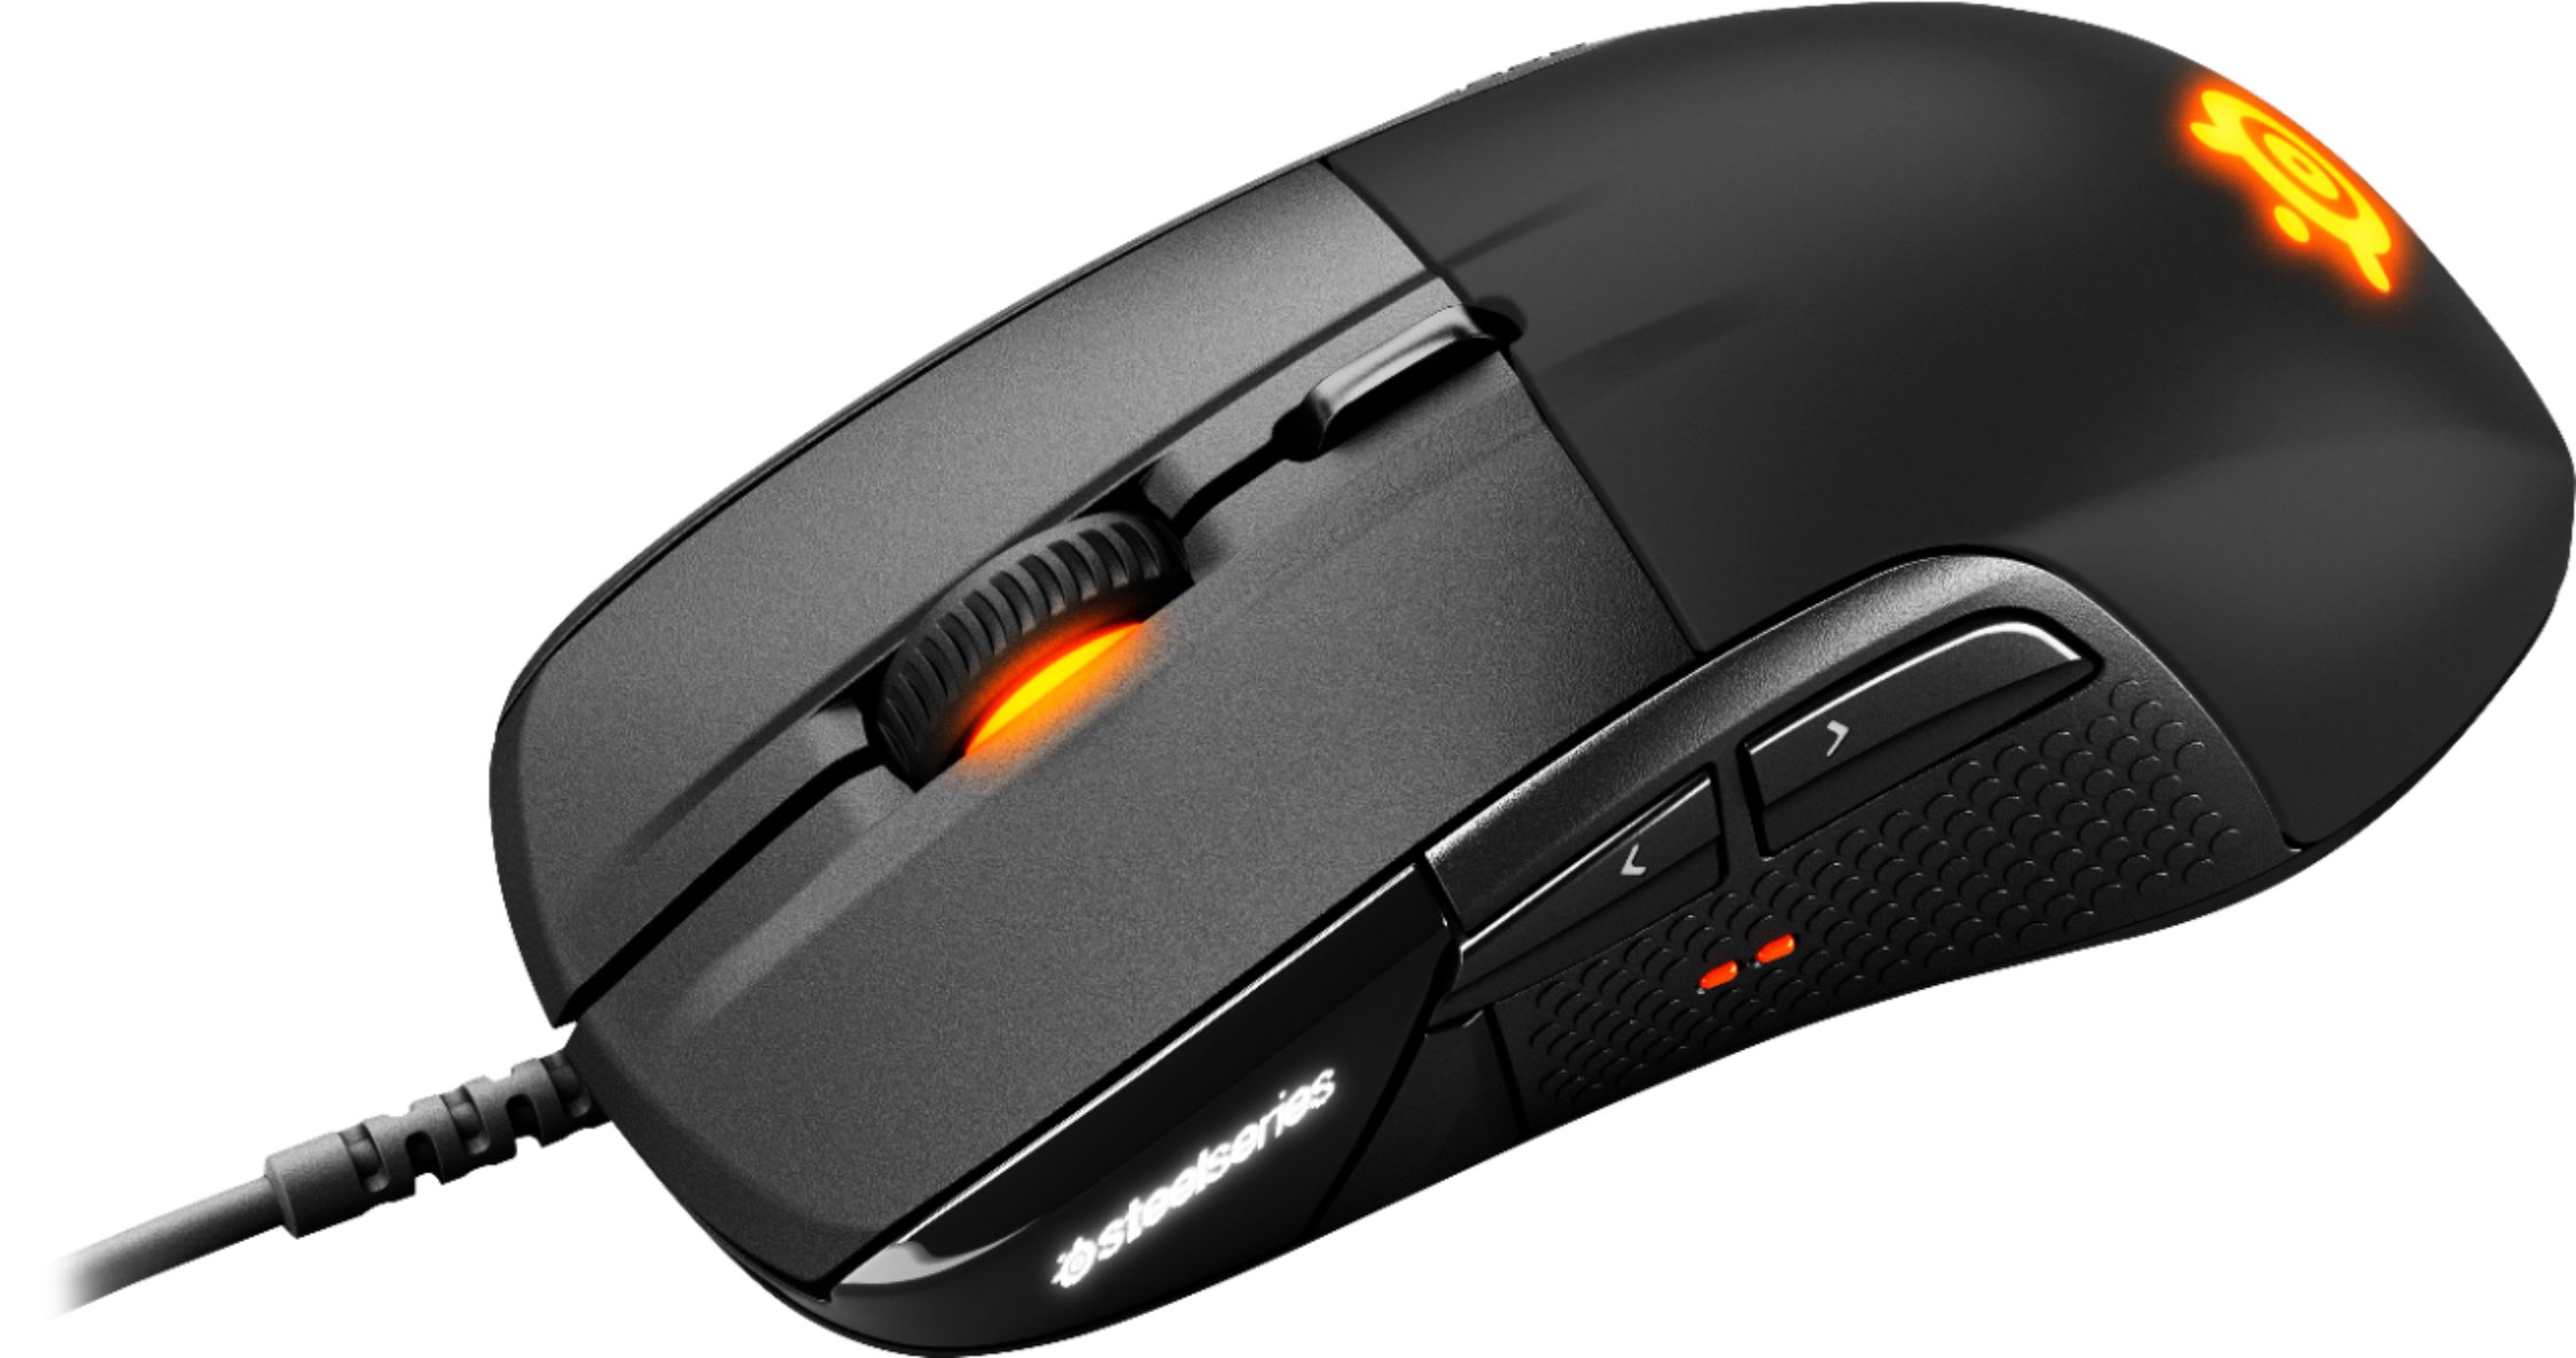  Steelseries Rival 710 Wired Gaming Mouse